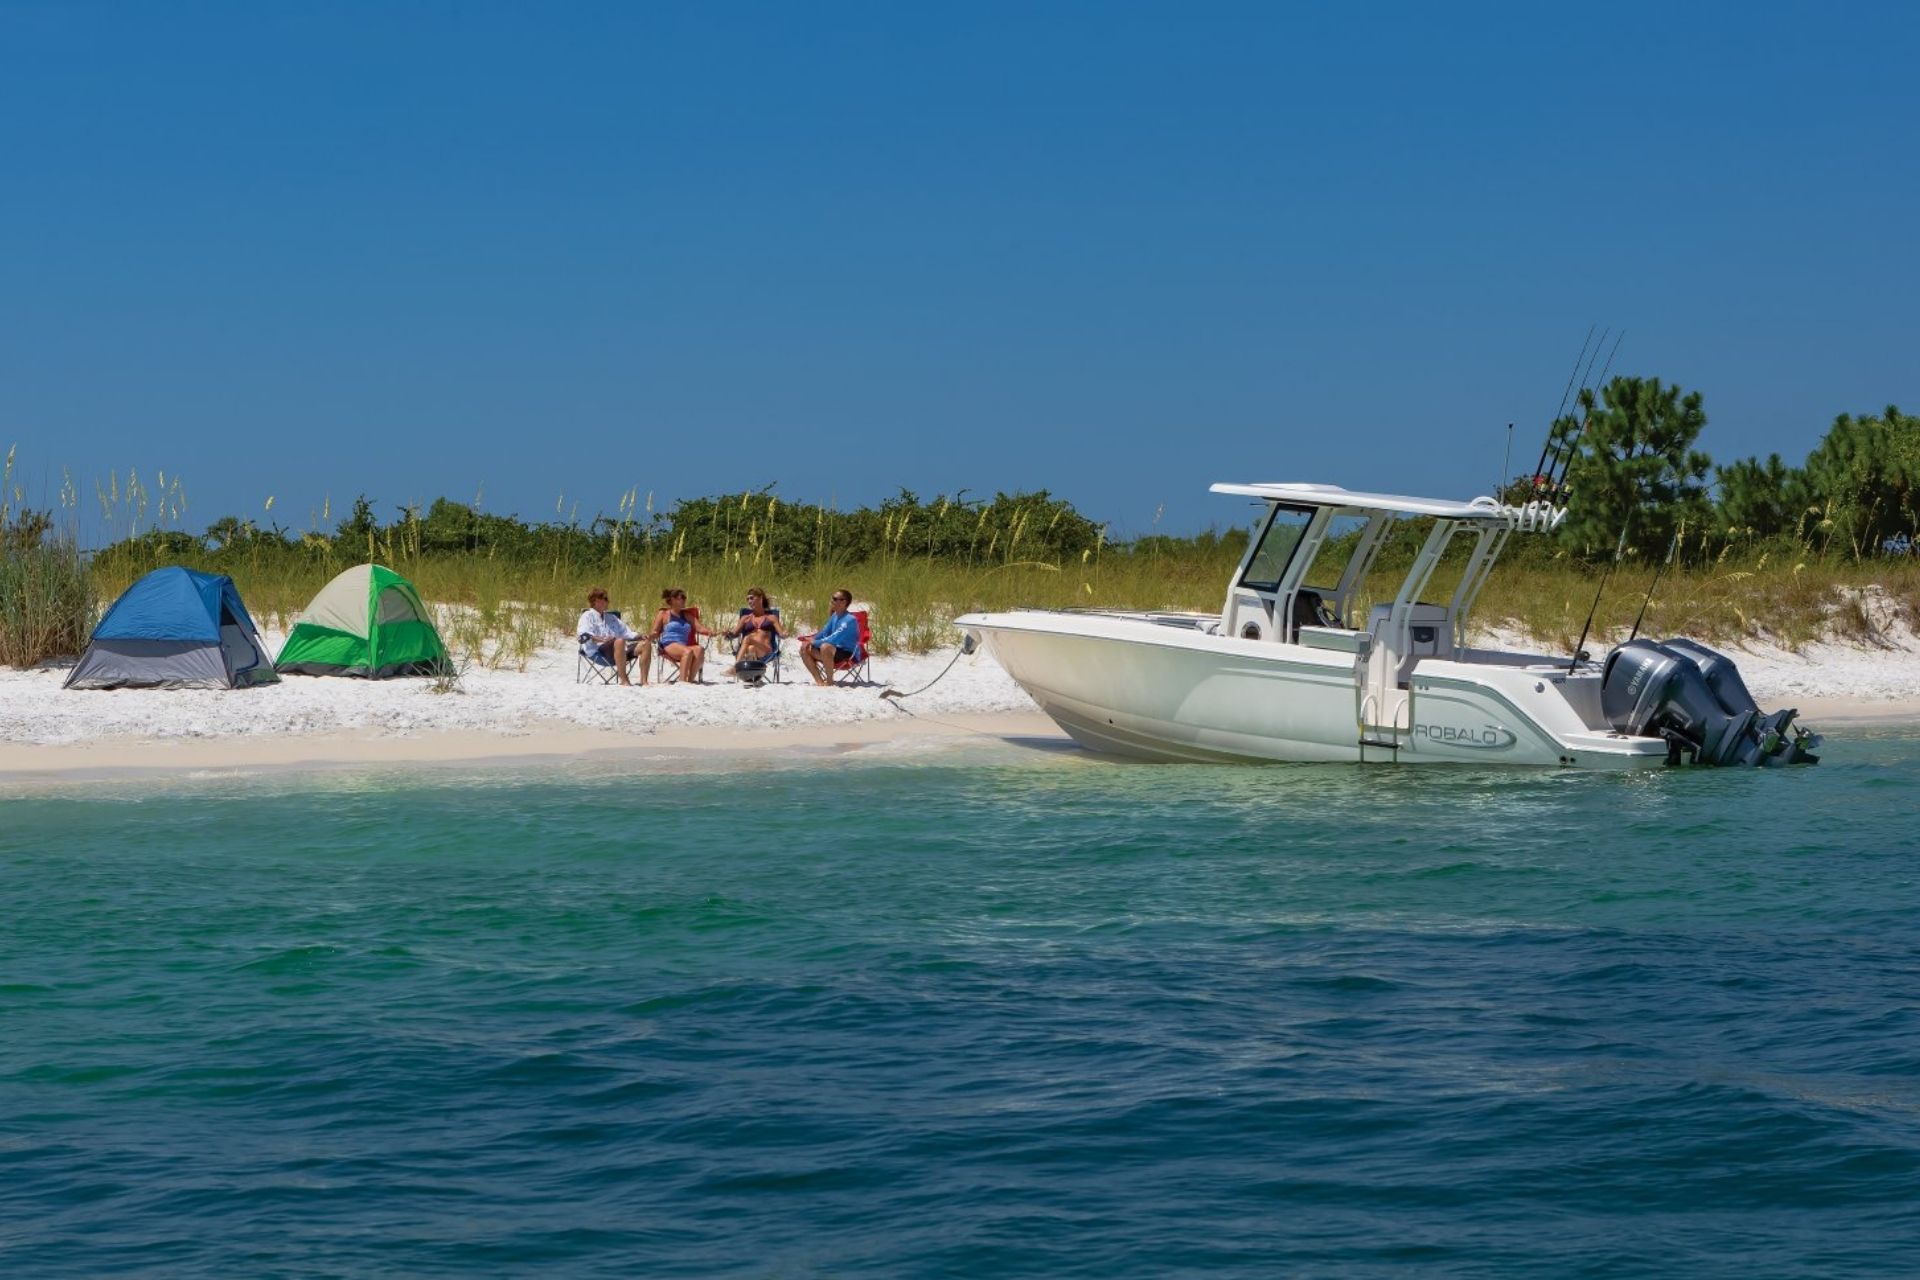 Robalo R272 boat beached